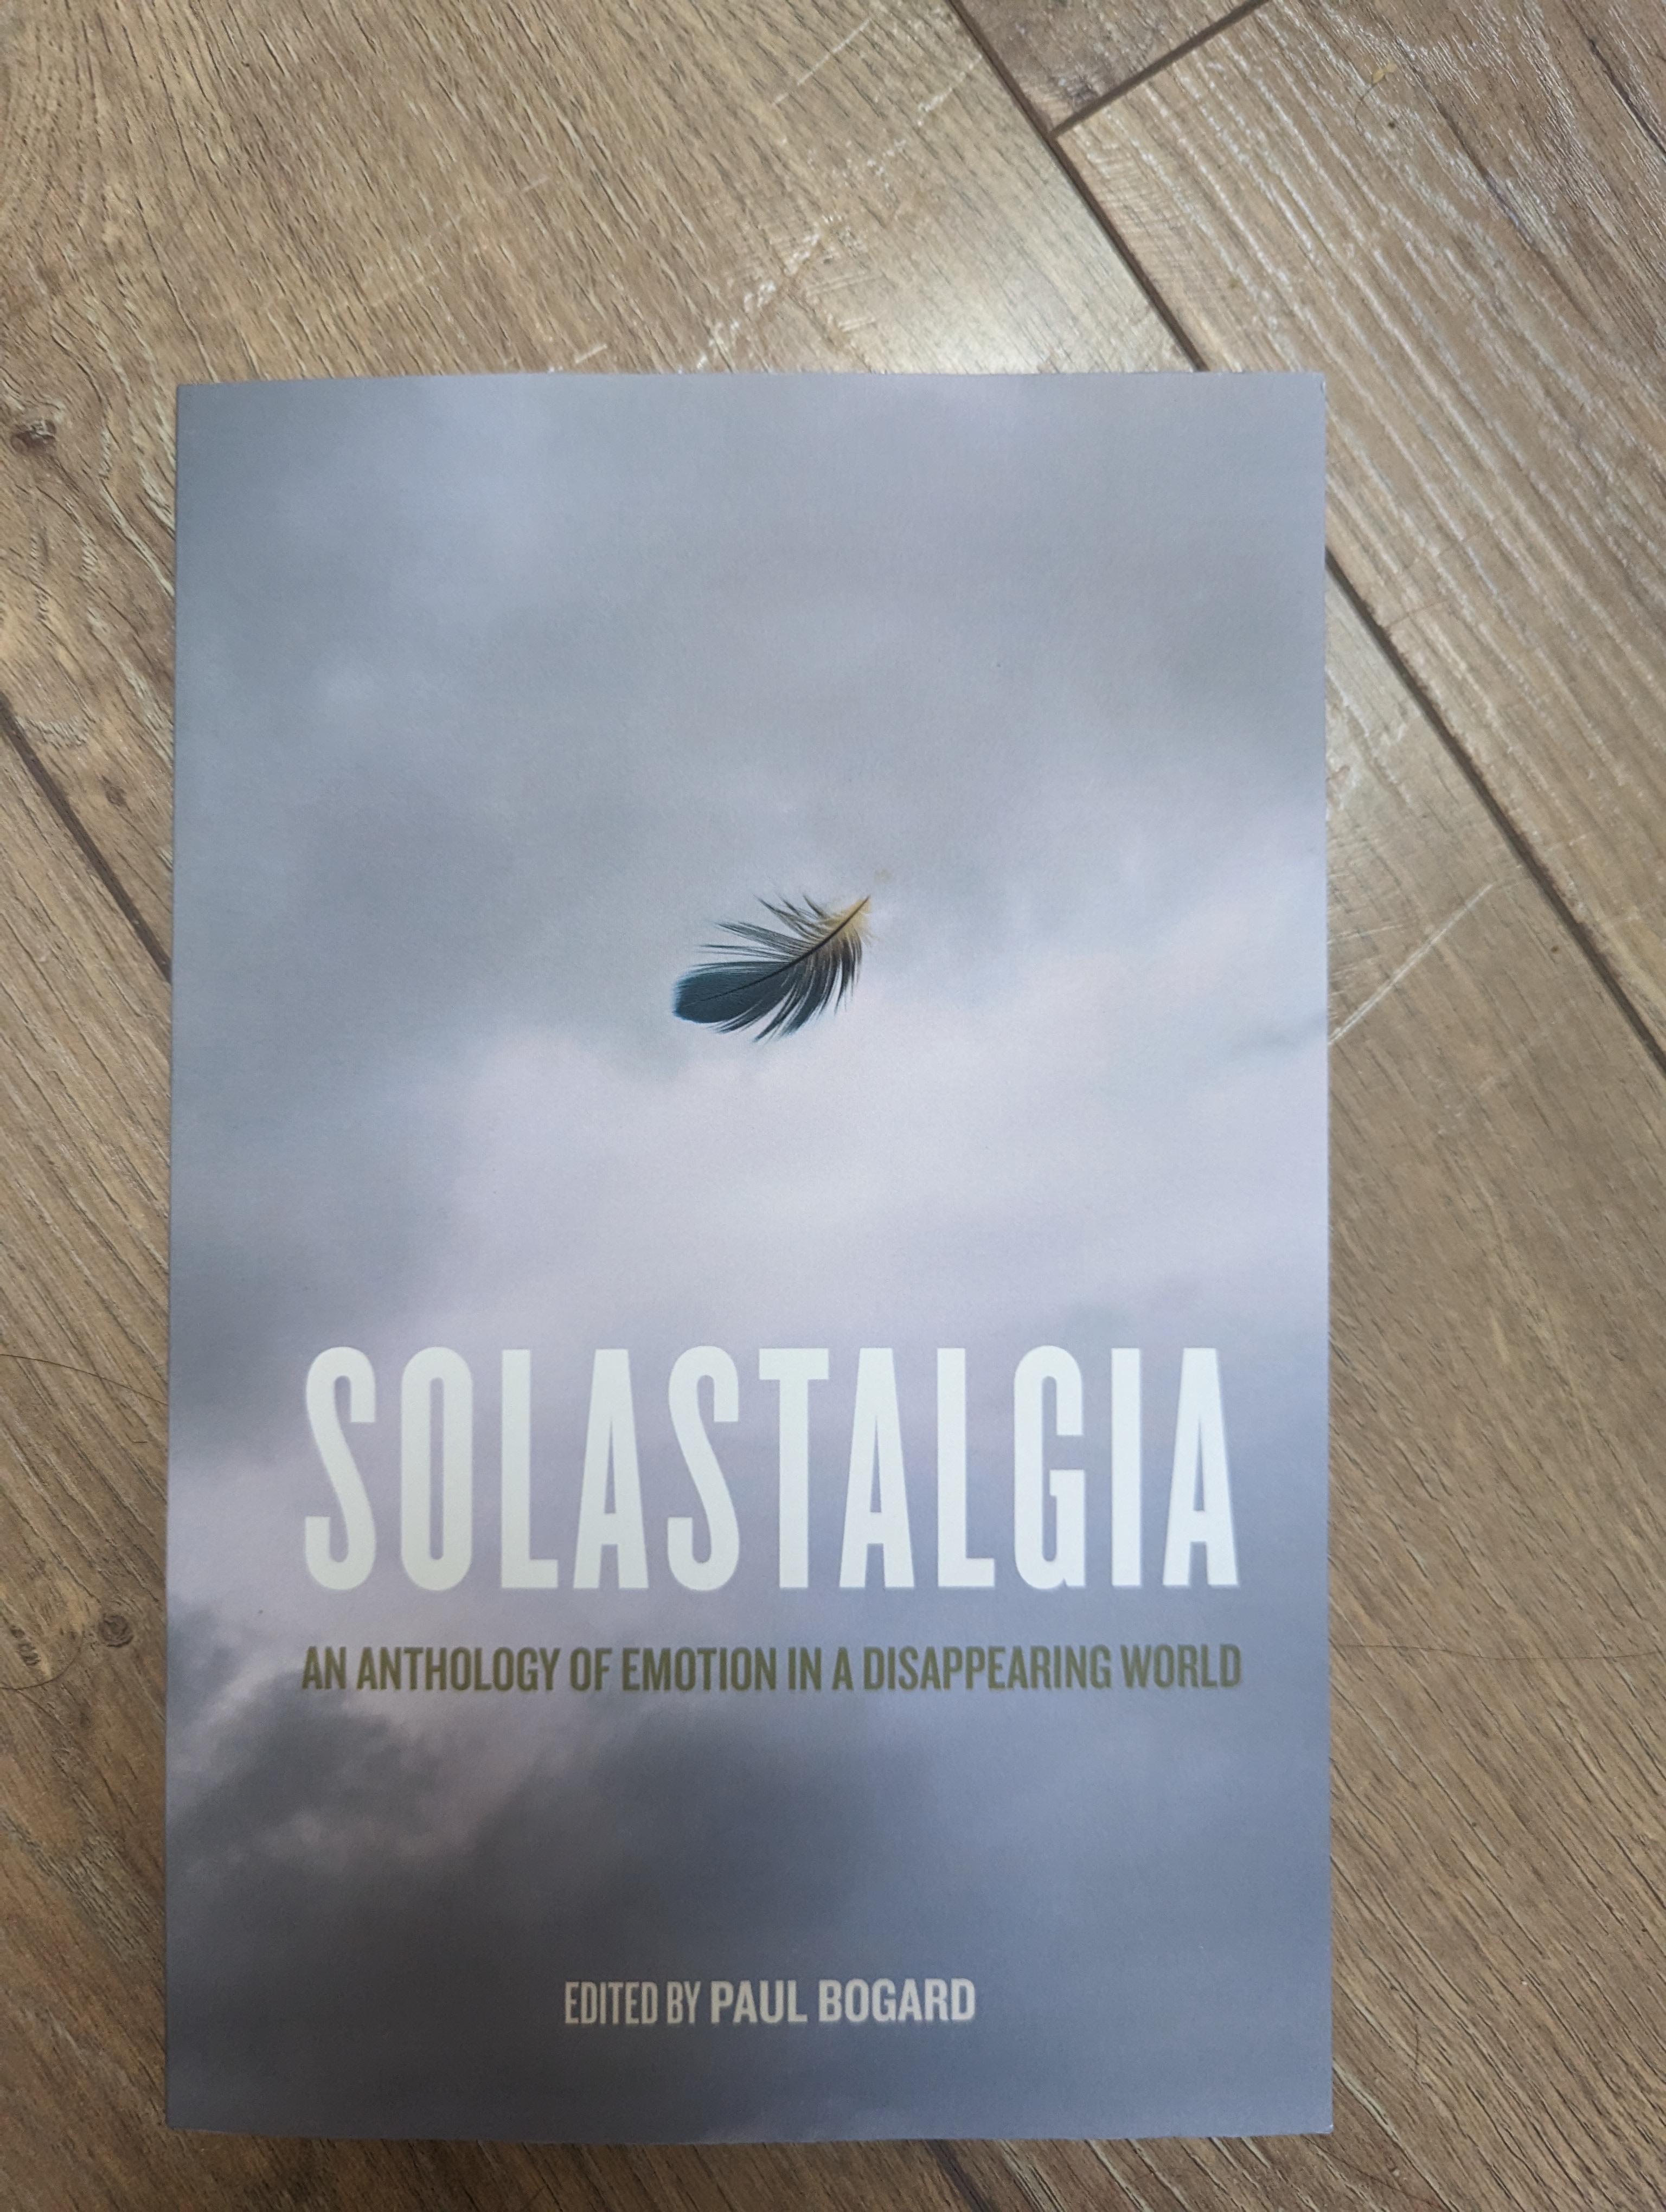 Solastalgia Book Cover with wood panel background